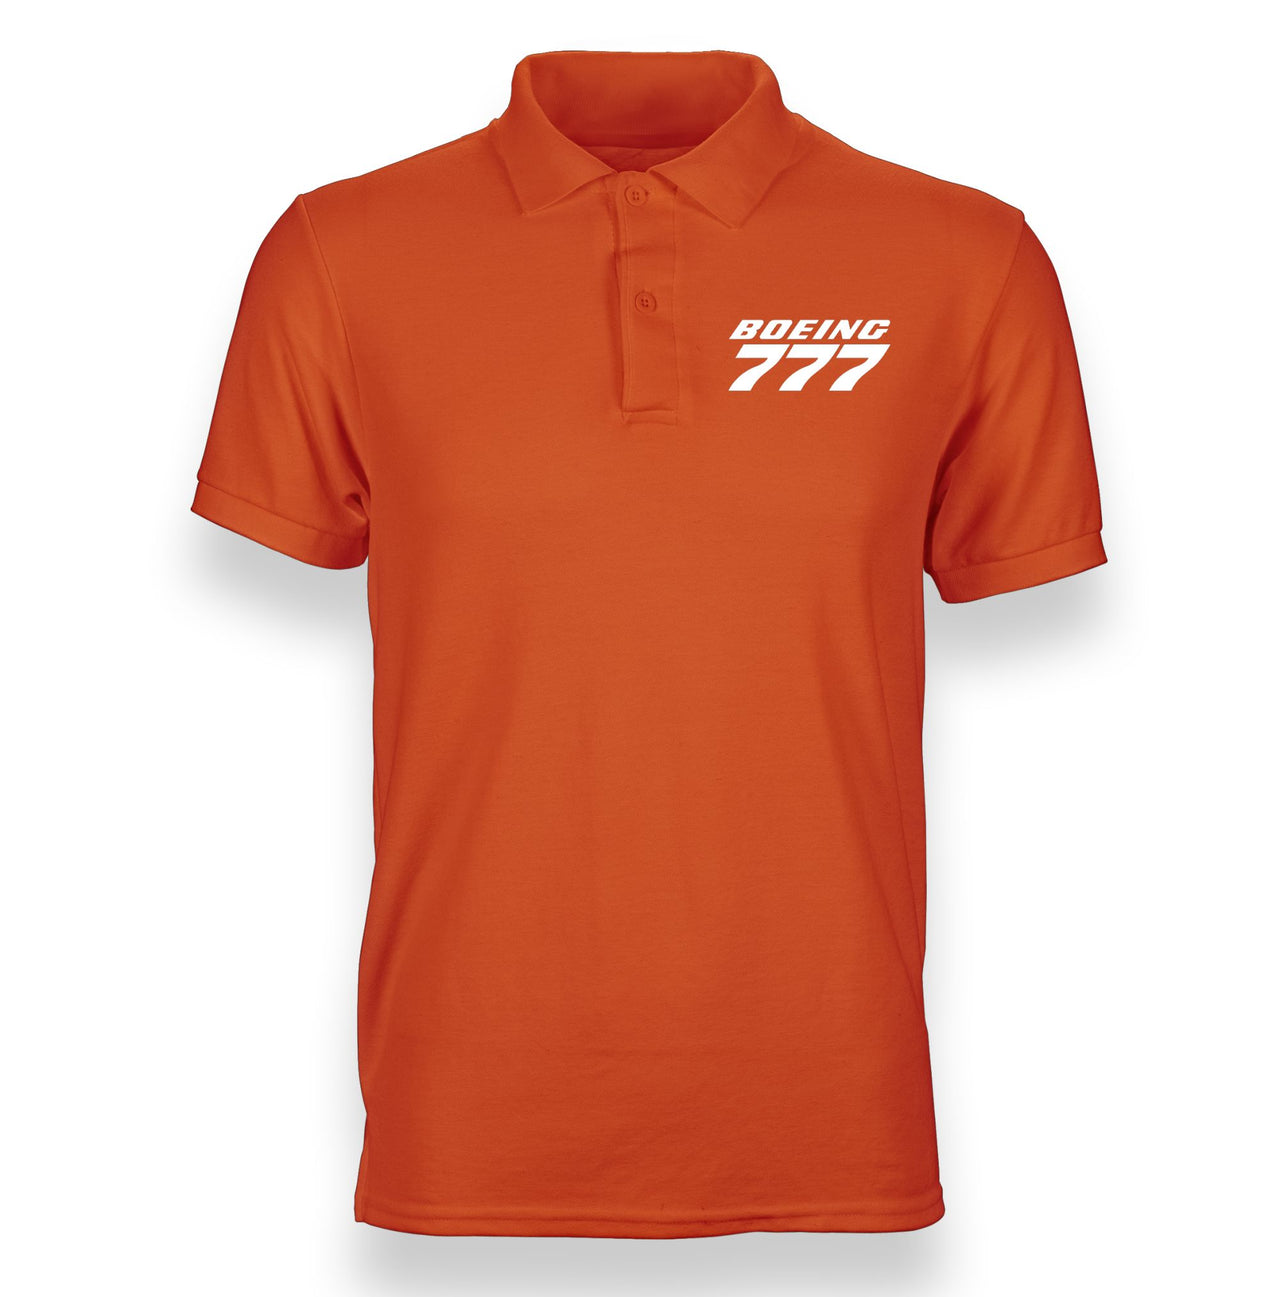 Boeing 777 & Text Designed "WOMEN" Polo T-Shirts